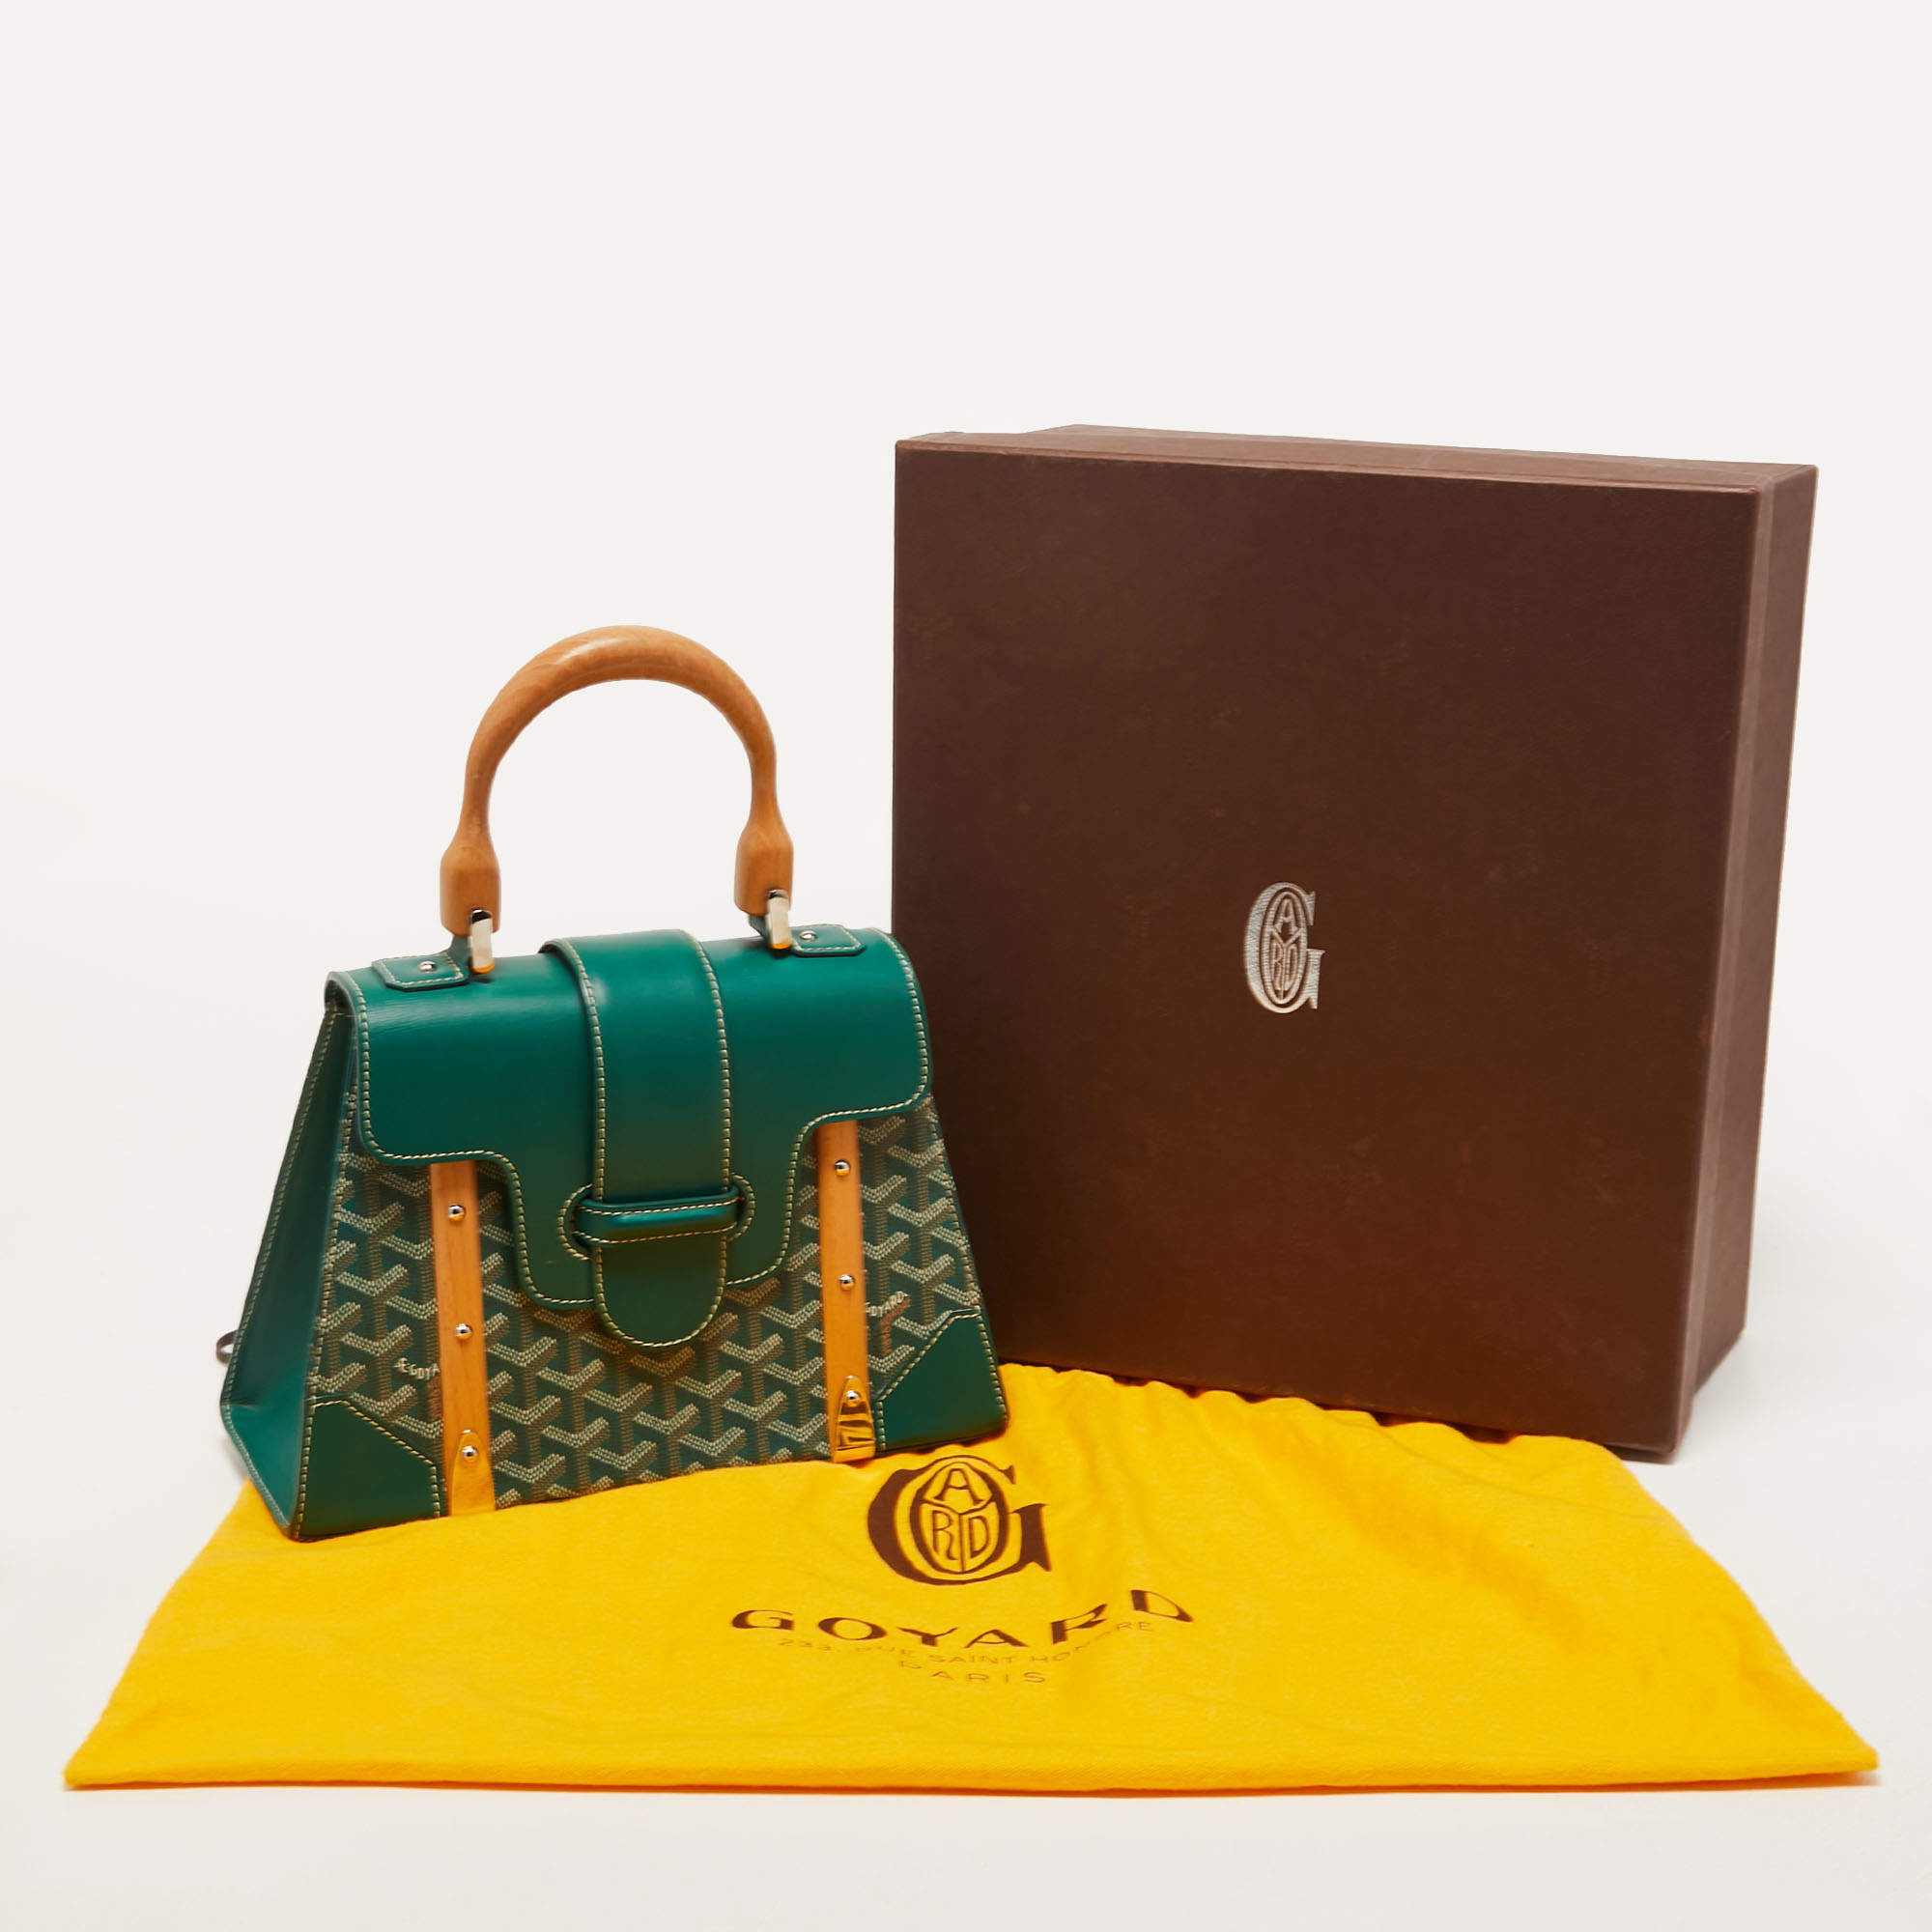 GOYARD, GREEN SAIGON PM IN COATED CANVAS AND LEATHER WITH WOODEN TOP  HANDLE, 2013, Handbags and Accessories, 2020